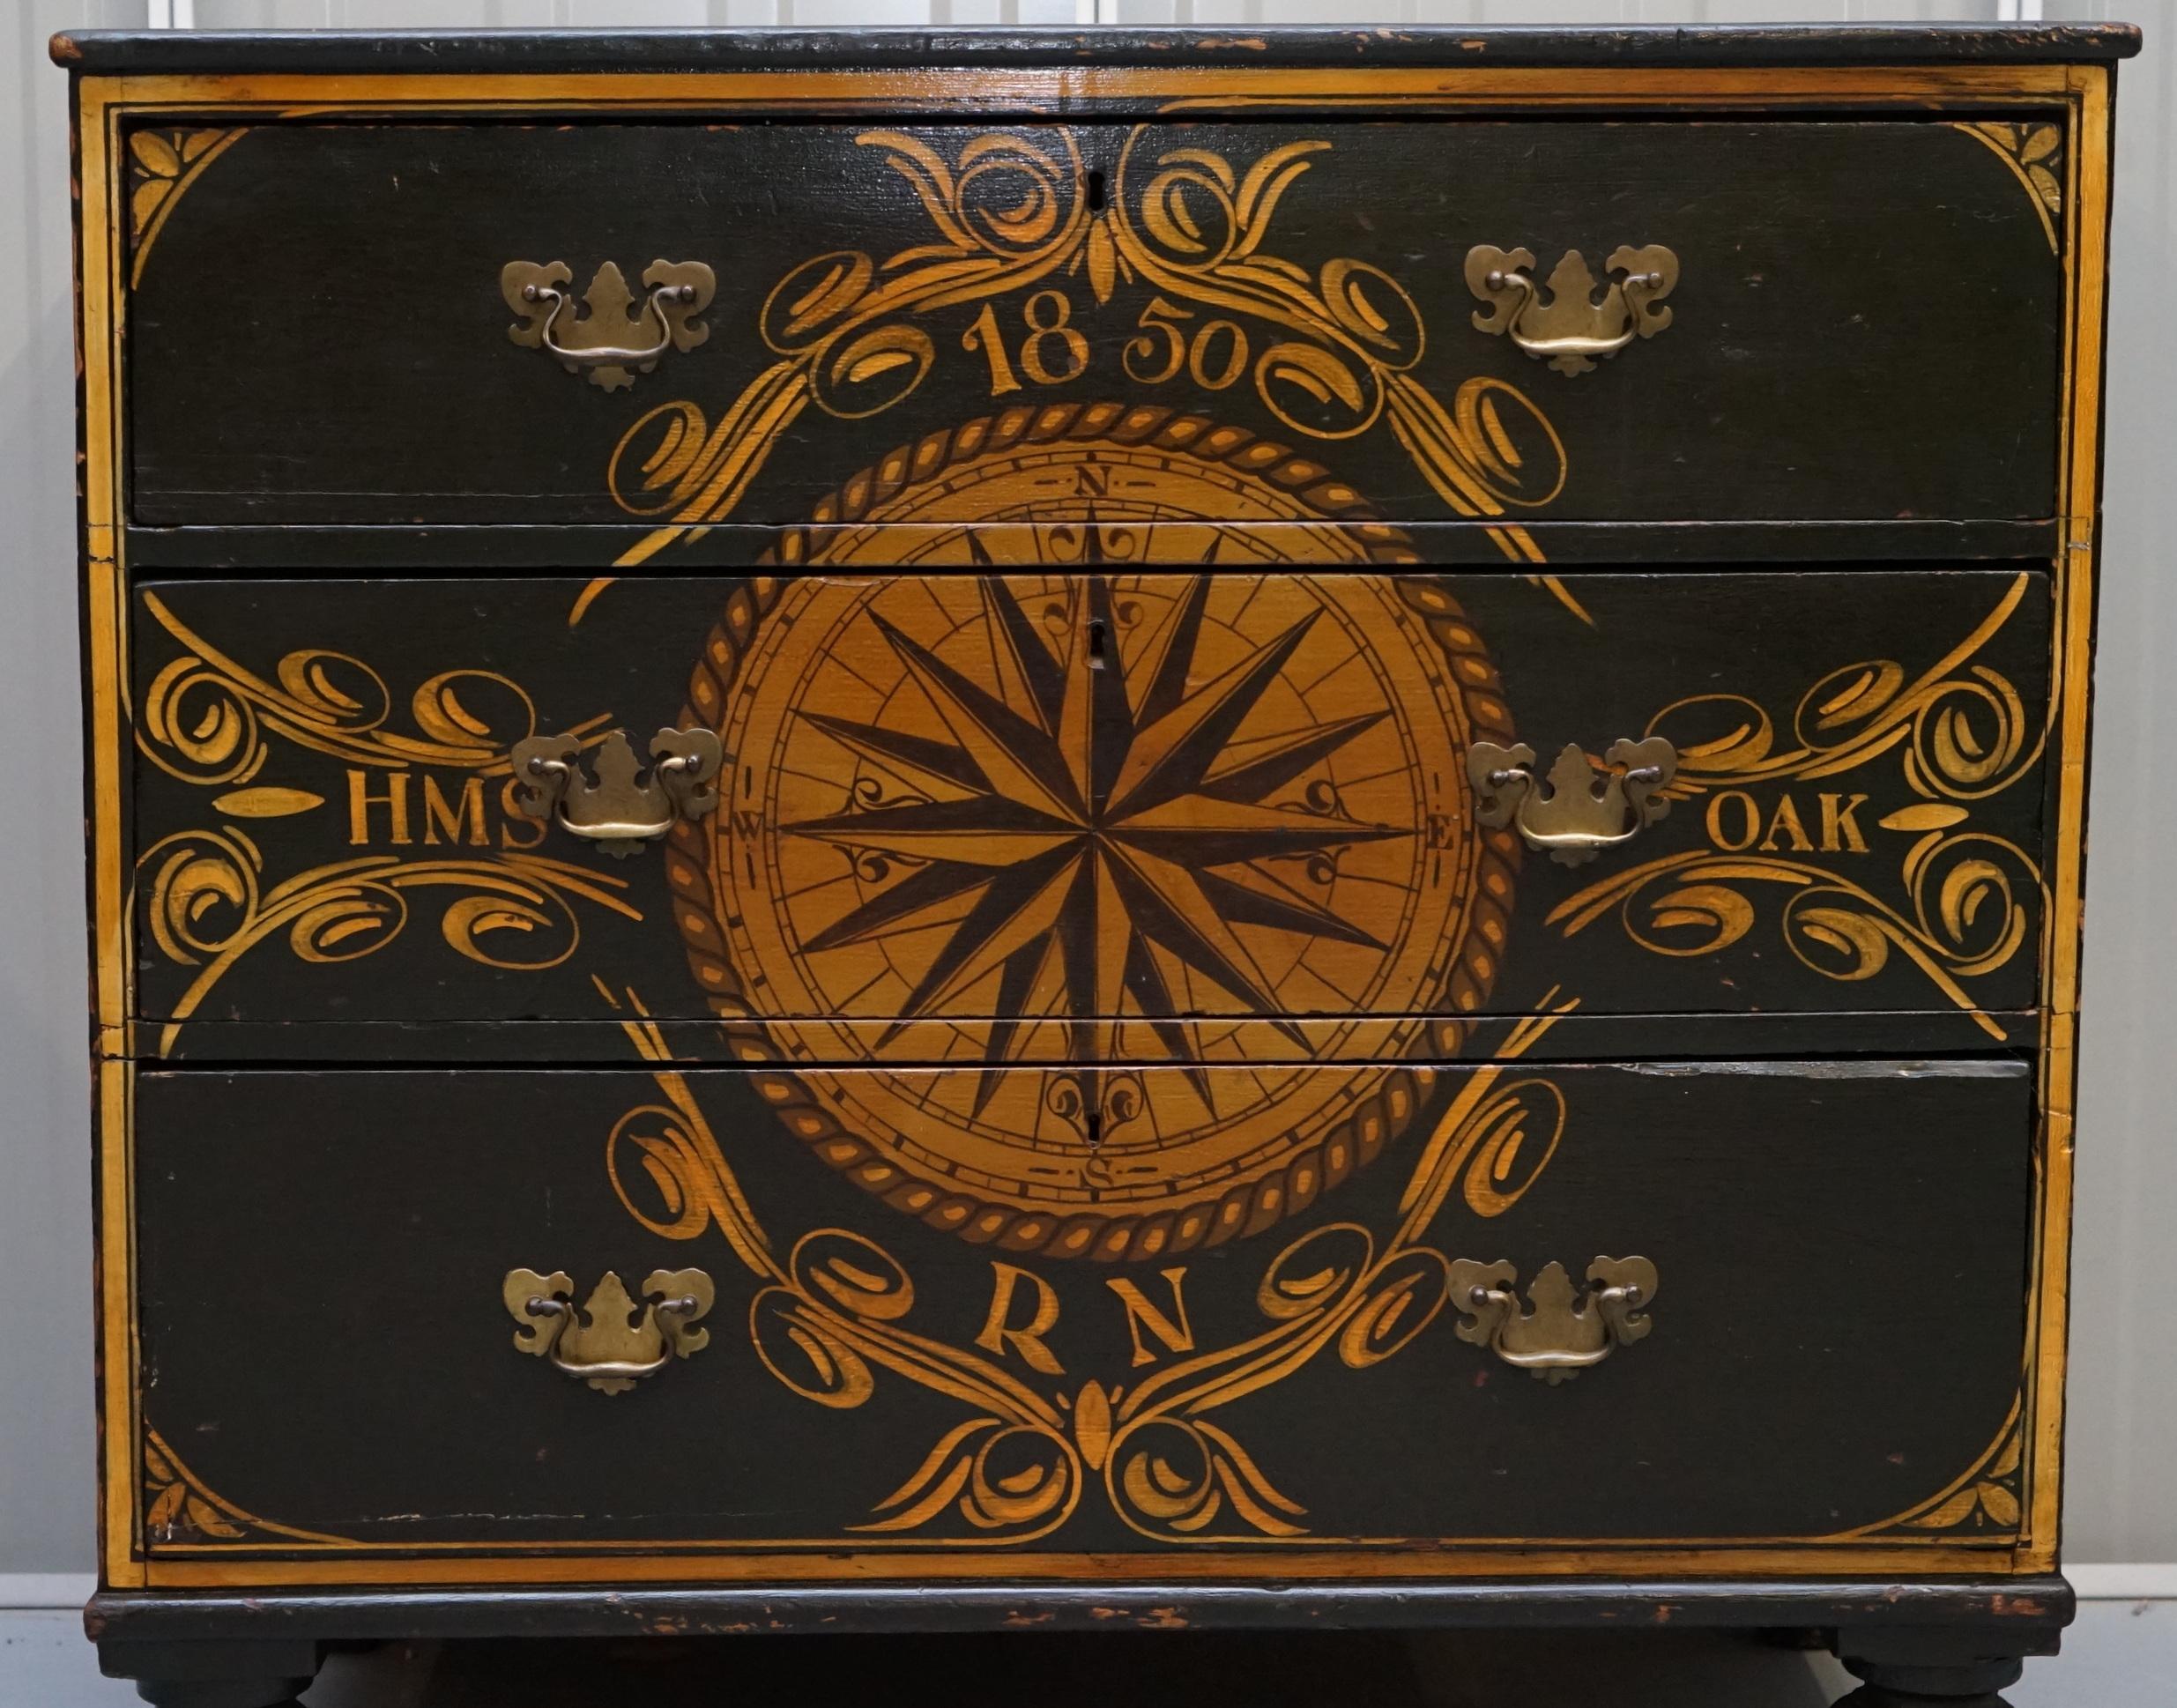 Victorian Made from the Timber of Hms Royal Oak Naval Ship Hand Painted Chest of Drawers